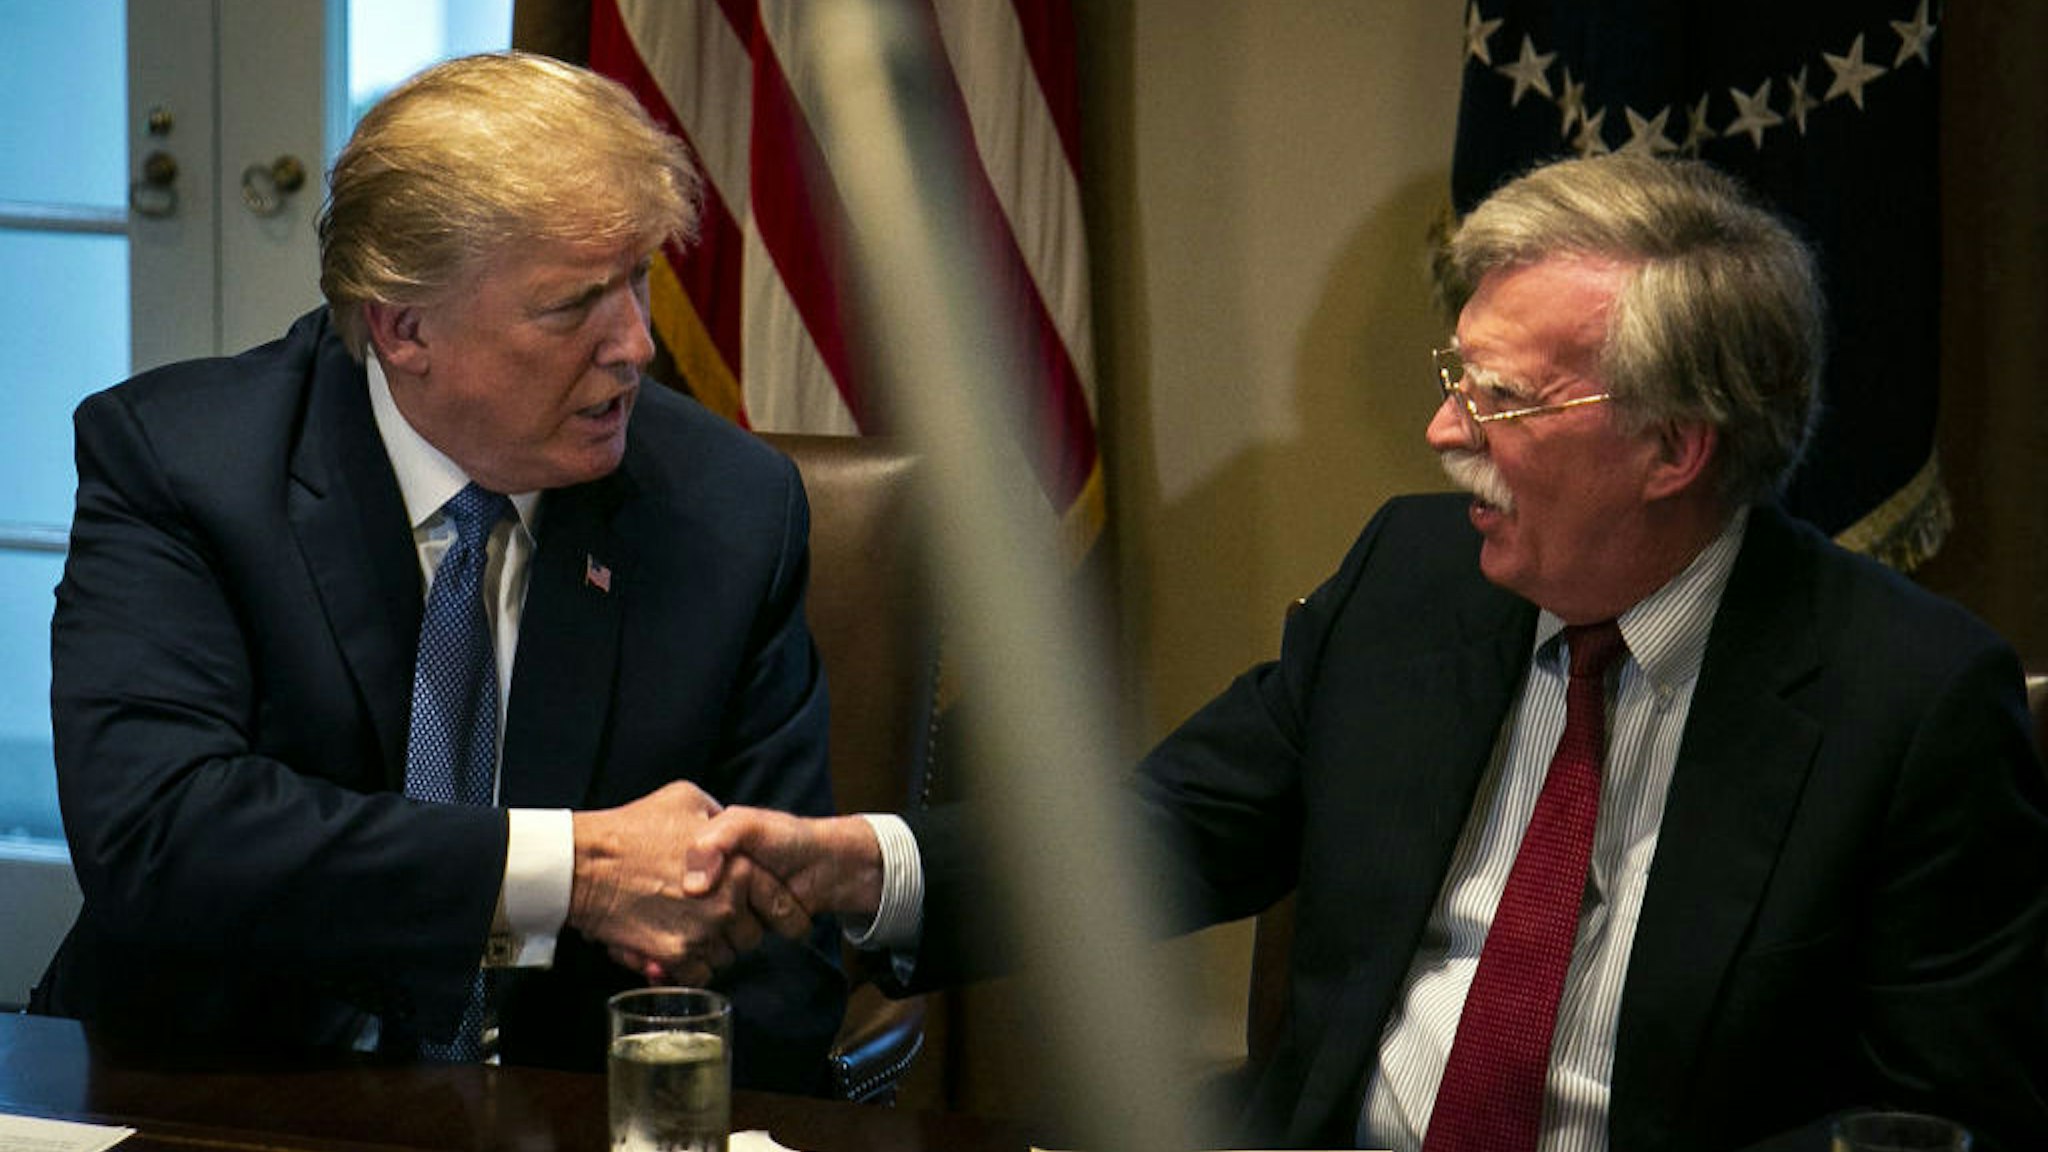 U.S. President Donald Trump, left, shakes hands with John Bolton, national security advisor, during a meeting with senior military leadership in the Cabinet Room of the White House in Washington, D.C., U.S., on Monday, April 9, 2018. Trump said he'll decide within two days on U.S. retaliation against Syria for a suspected chemical weapons attack by President Bashar al-Assad's regime over the weekend, and suggested Russian President Vladimir Putin may share responsibility. Photographer: Al Drago/Bloomberg